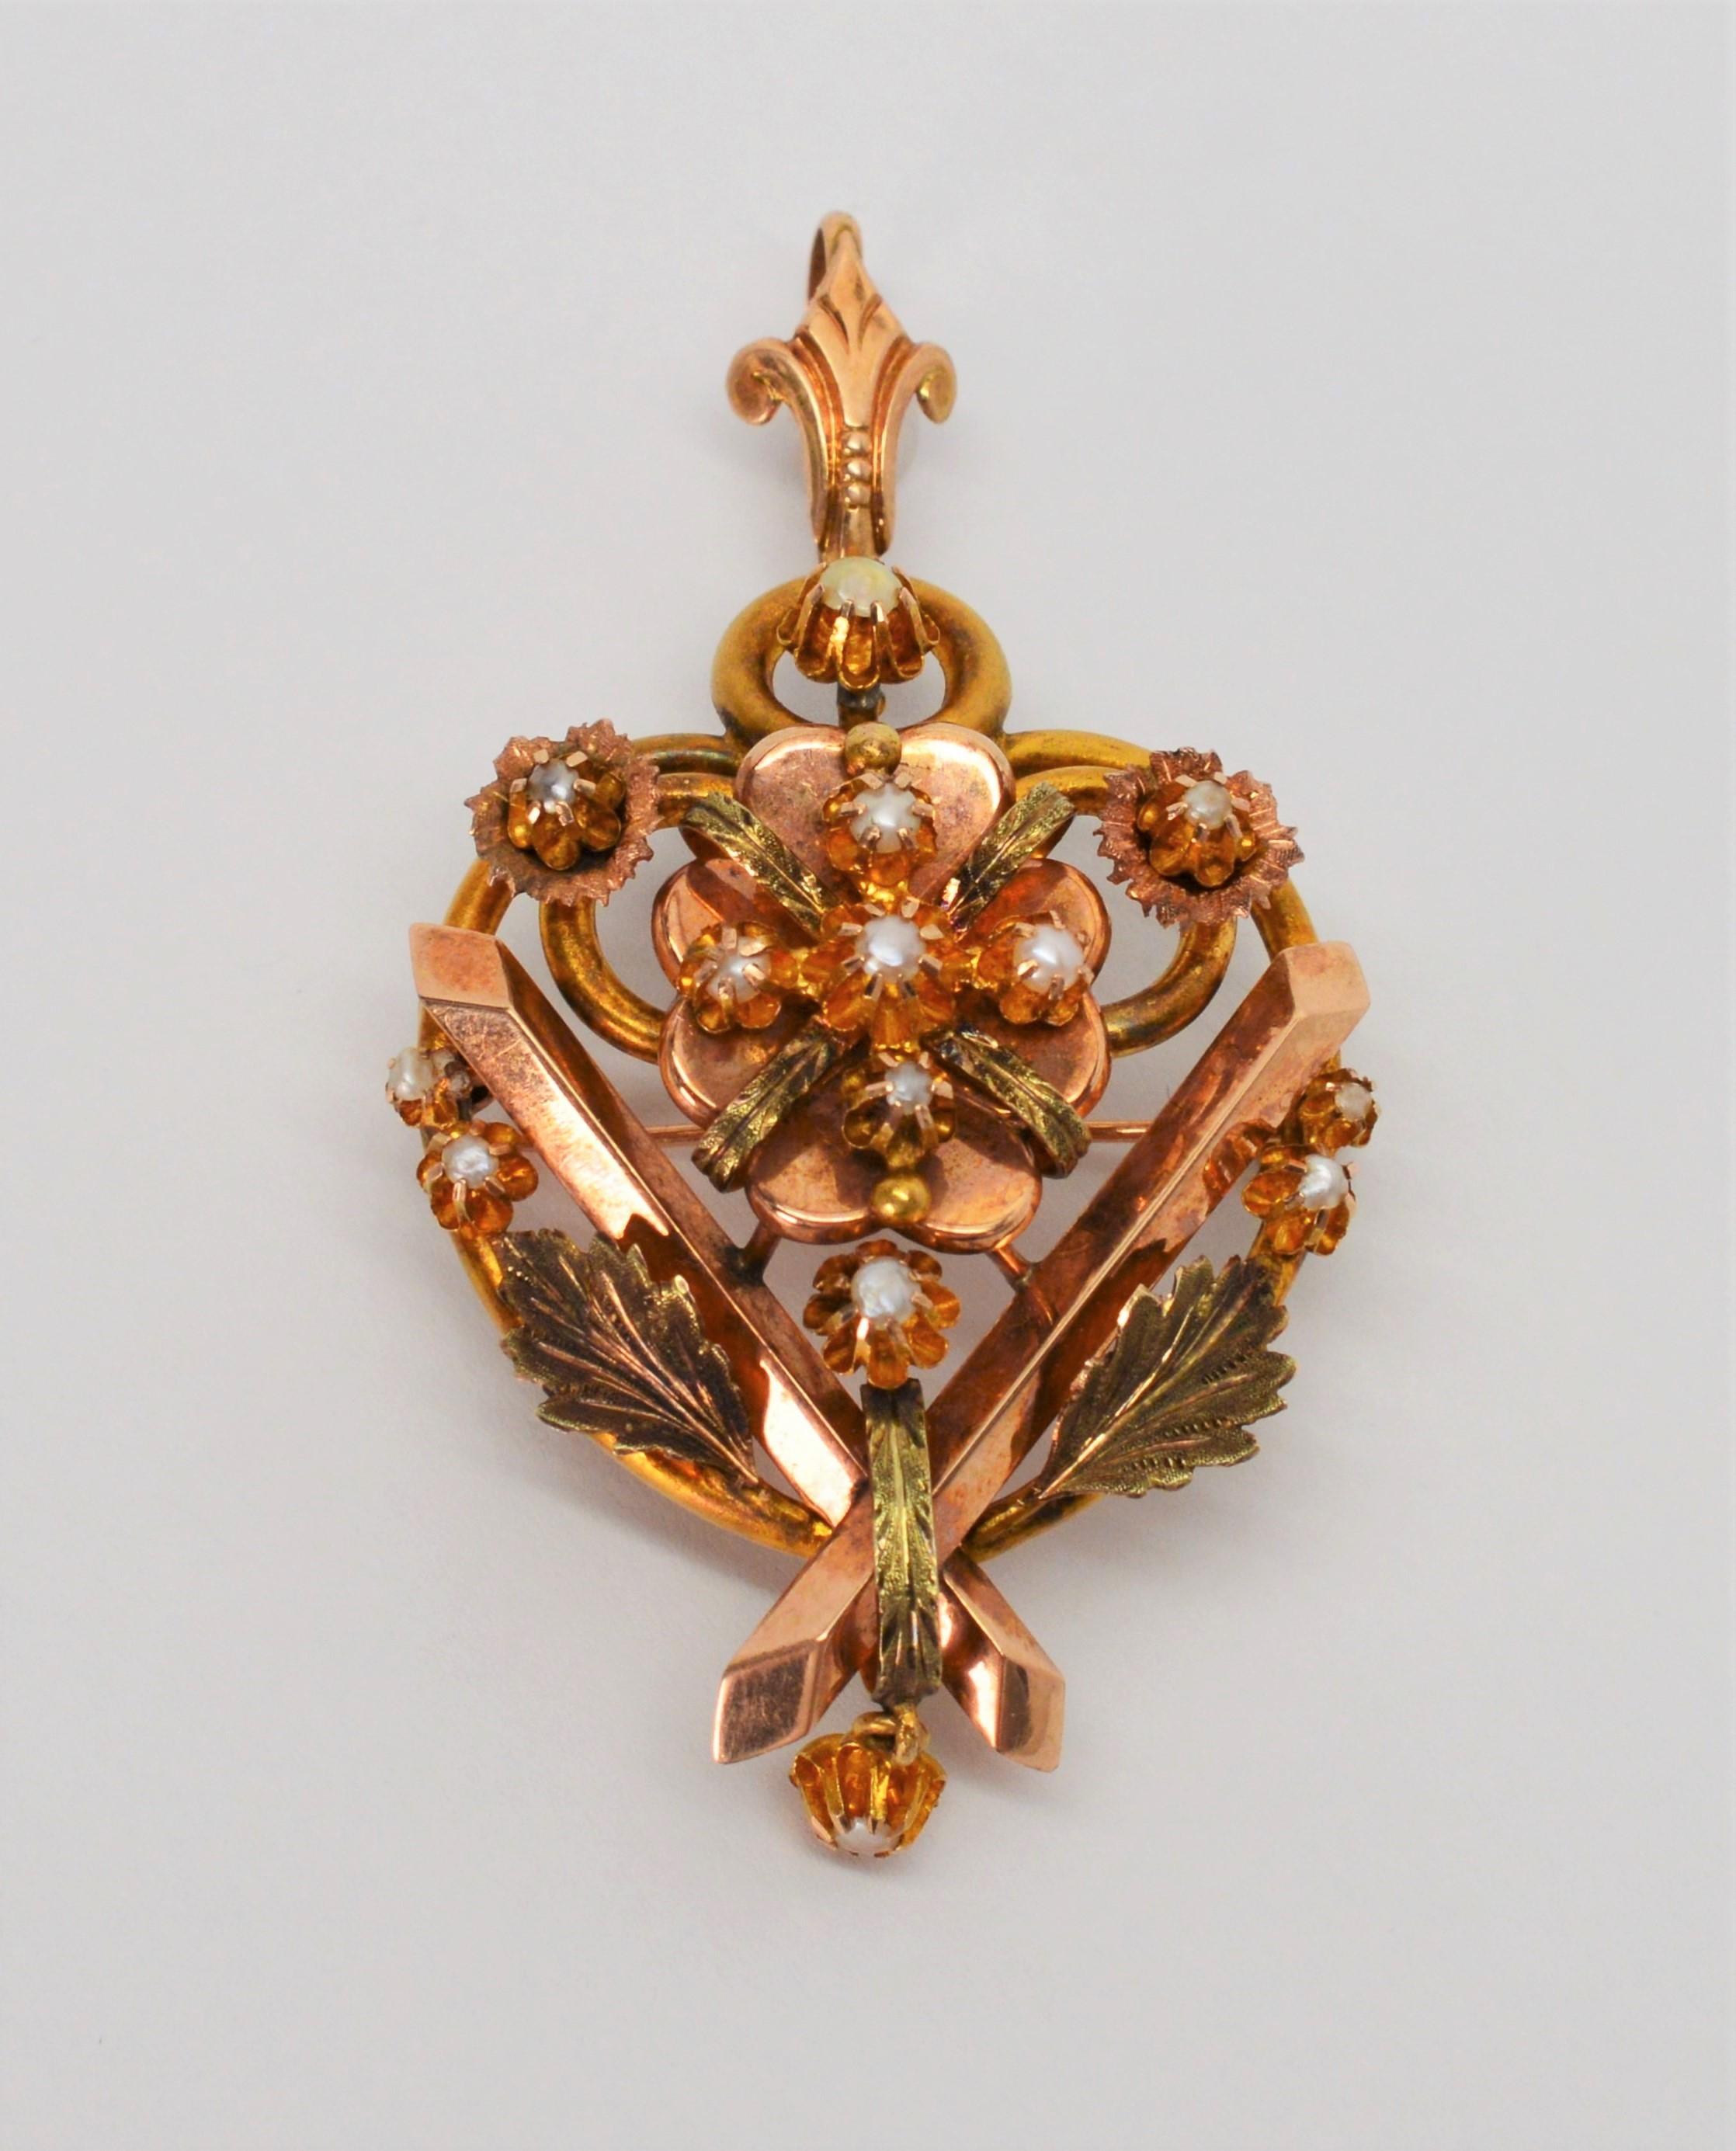 Intricate detail with the use of mixed finishes makes this Victorian brooch an artful stand out piece.  A romantic heart shaped crest is ornately decorated with individually set miniature pearl posies and interpretations of ribbon in yellow and rose